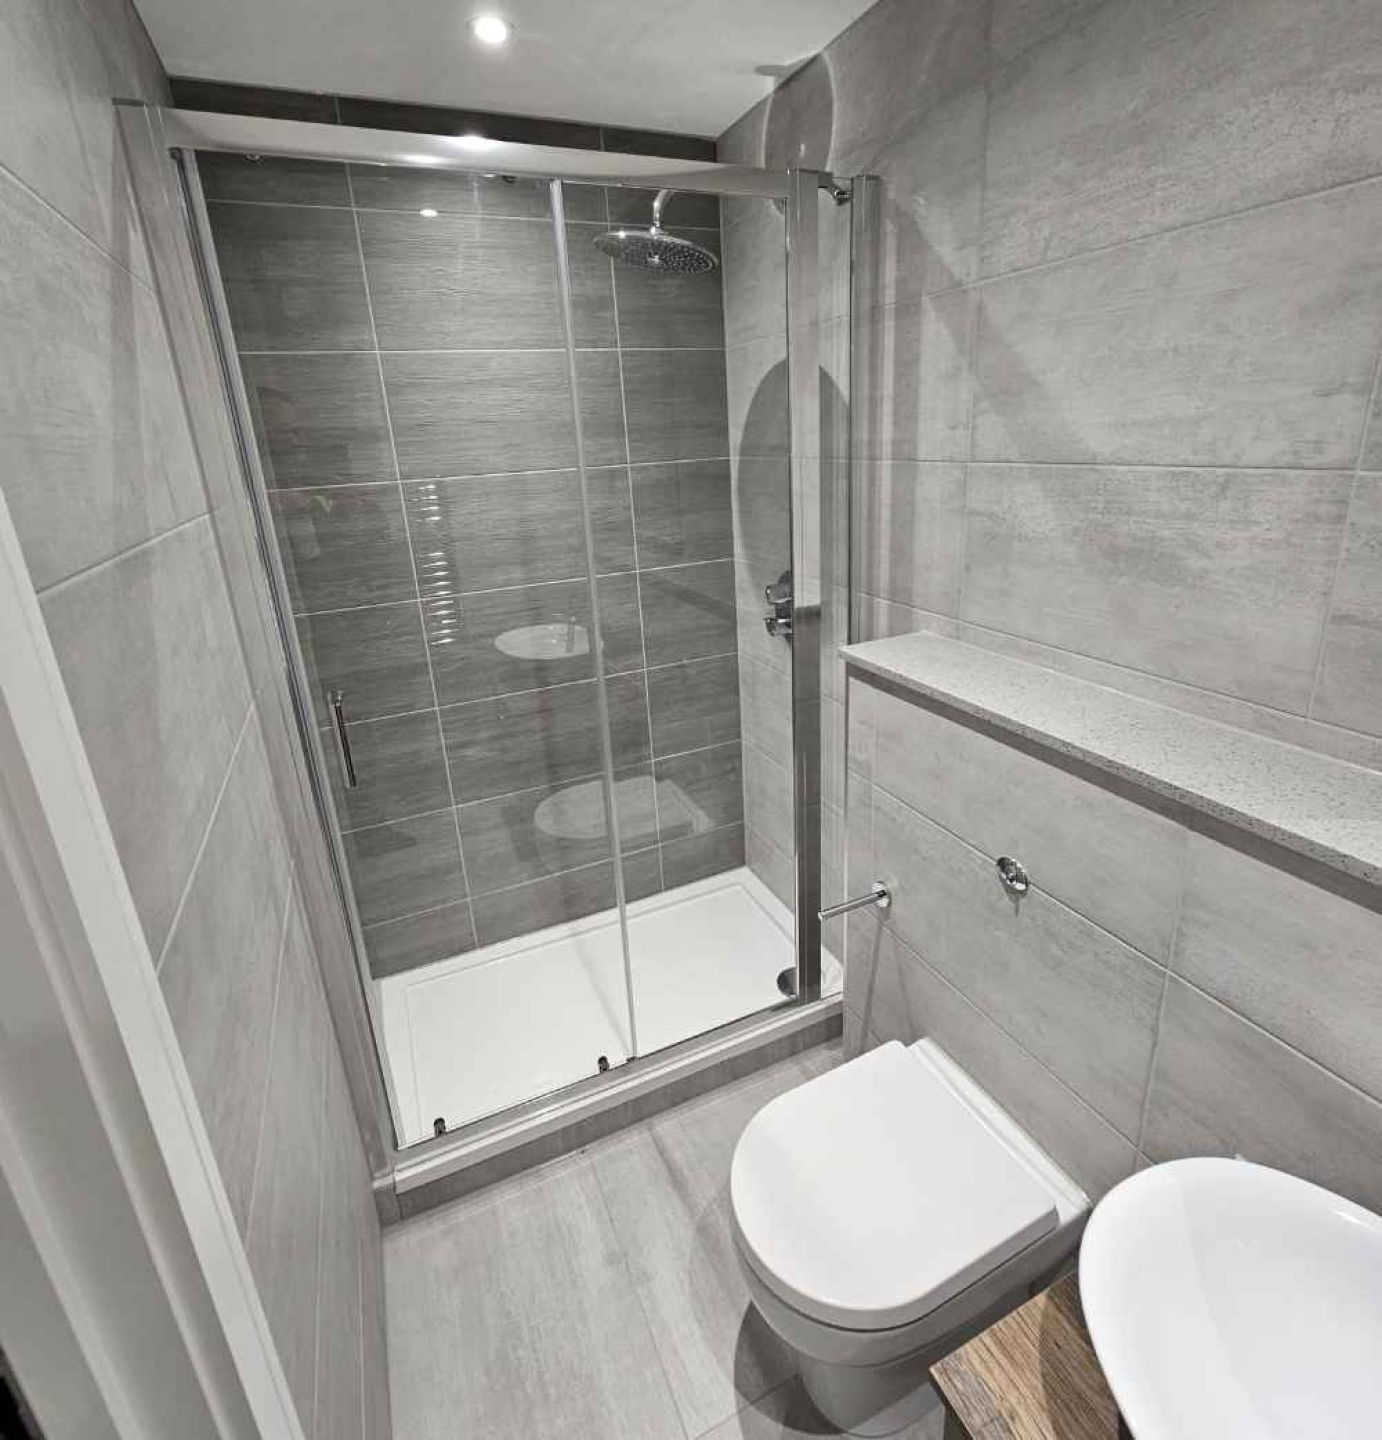 Toilet and shower room with grey slate tiles, toilet and basin.